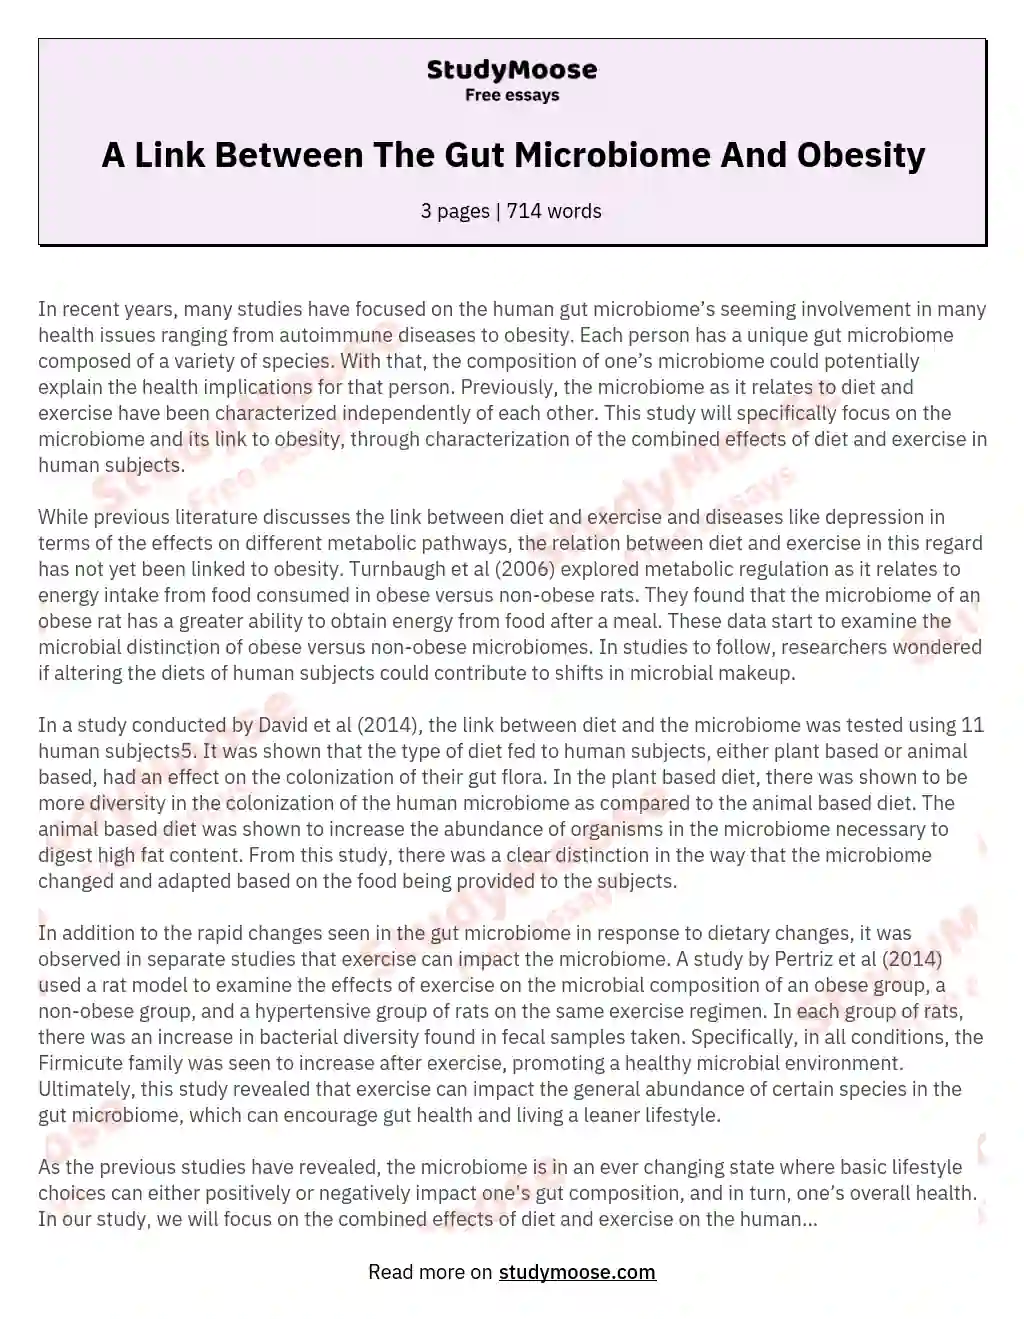 A Link Between The Gut Microbiome And Obesity essay